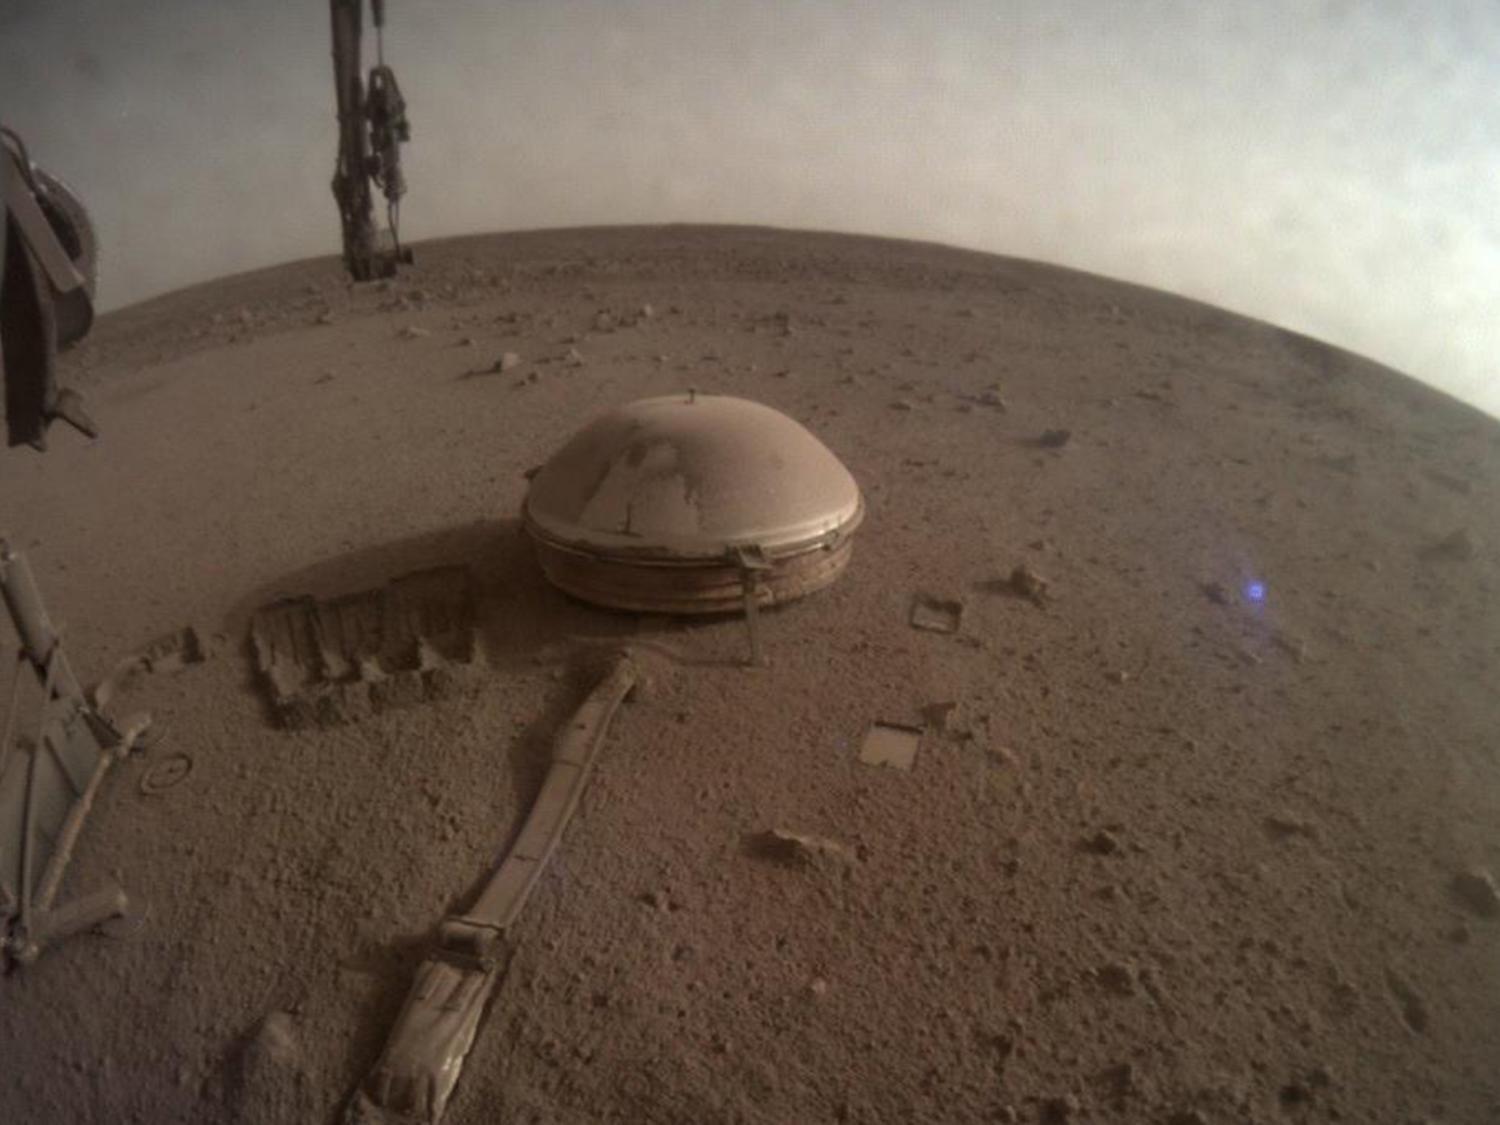  seismometer on the red planet's surface